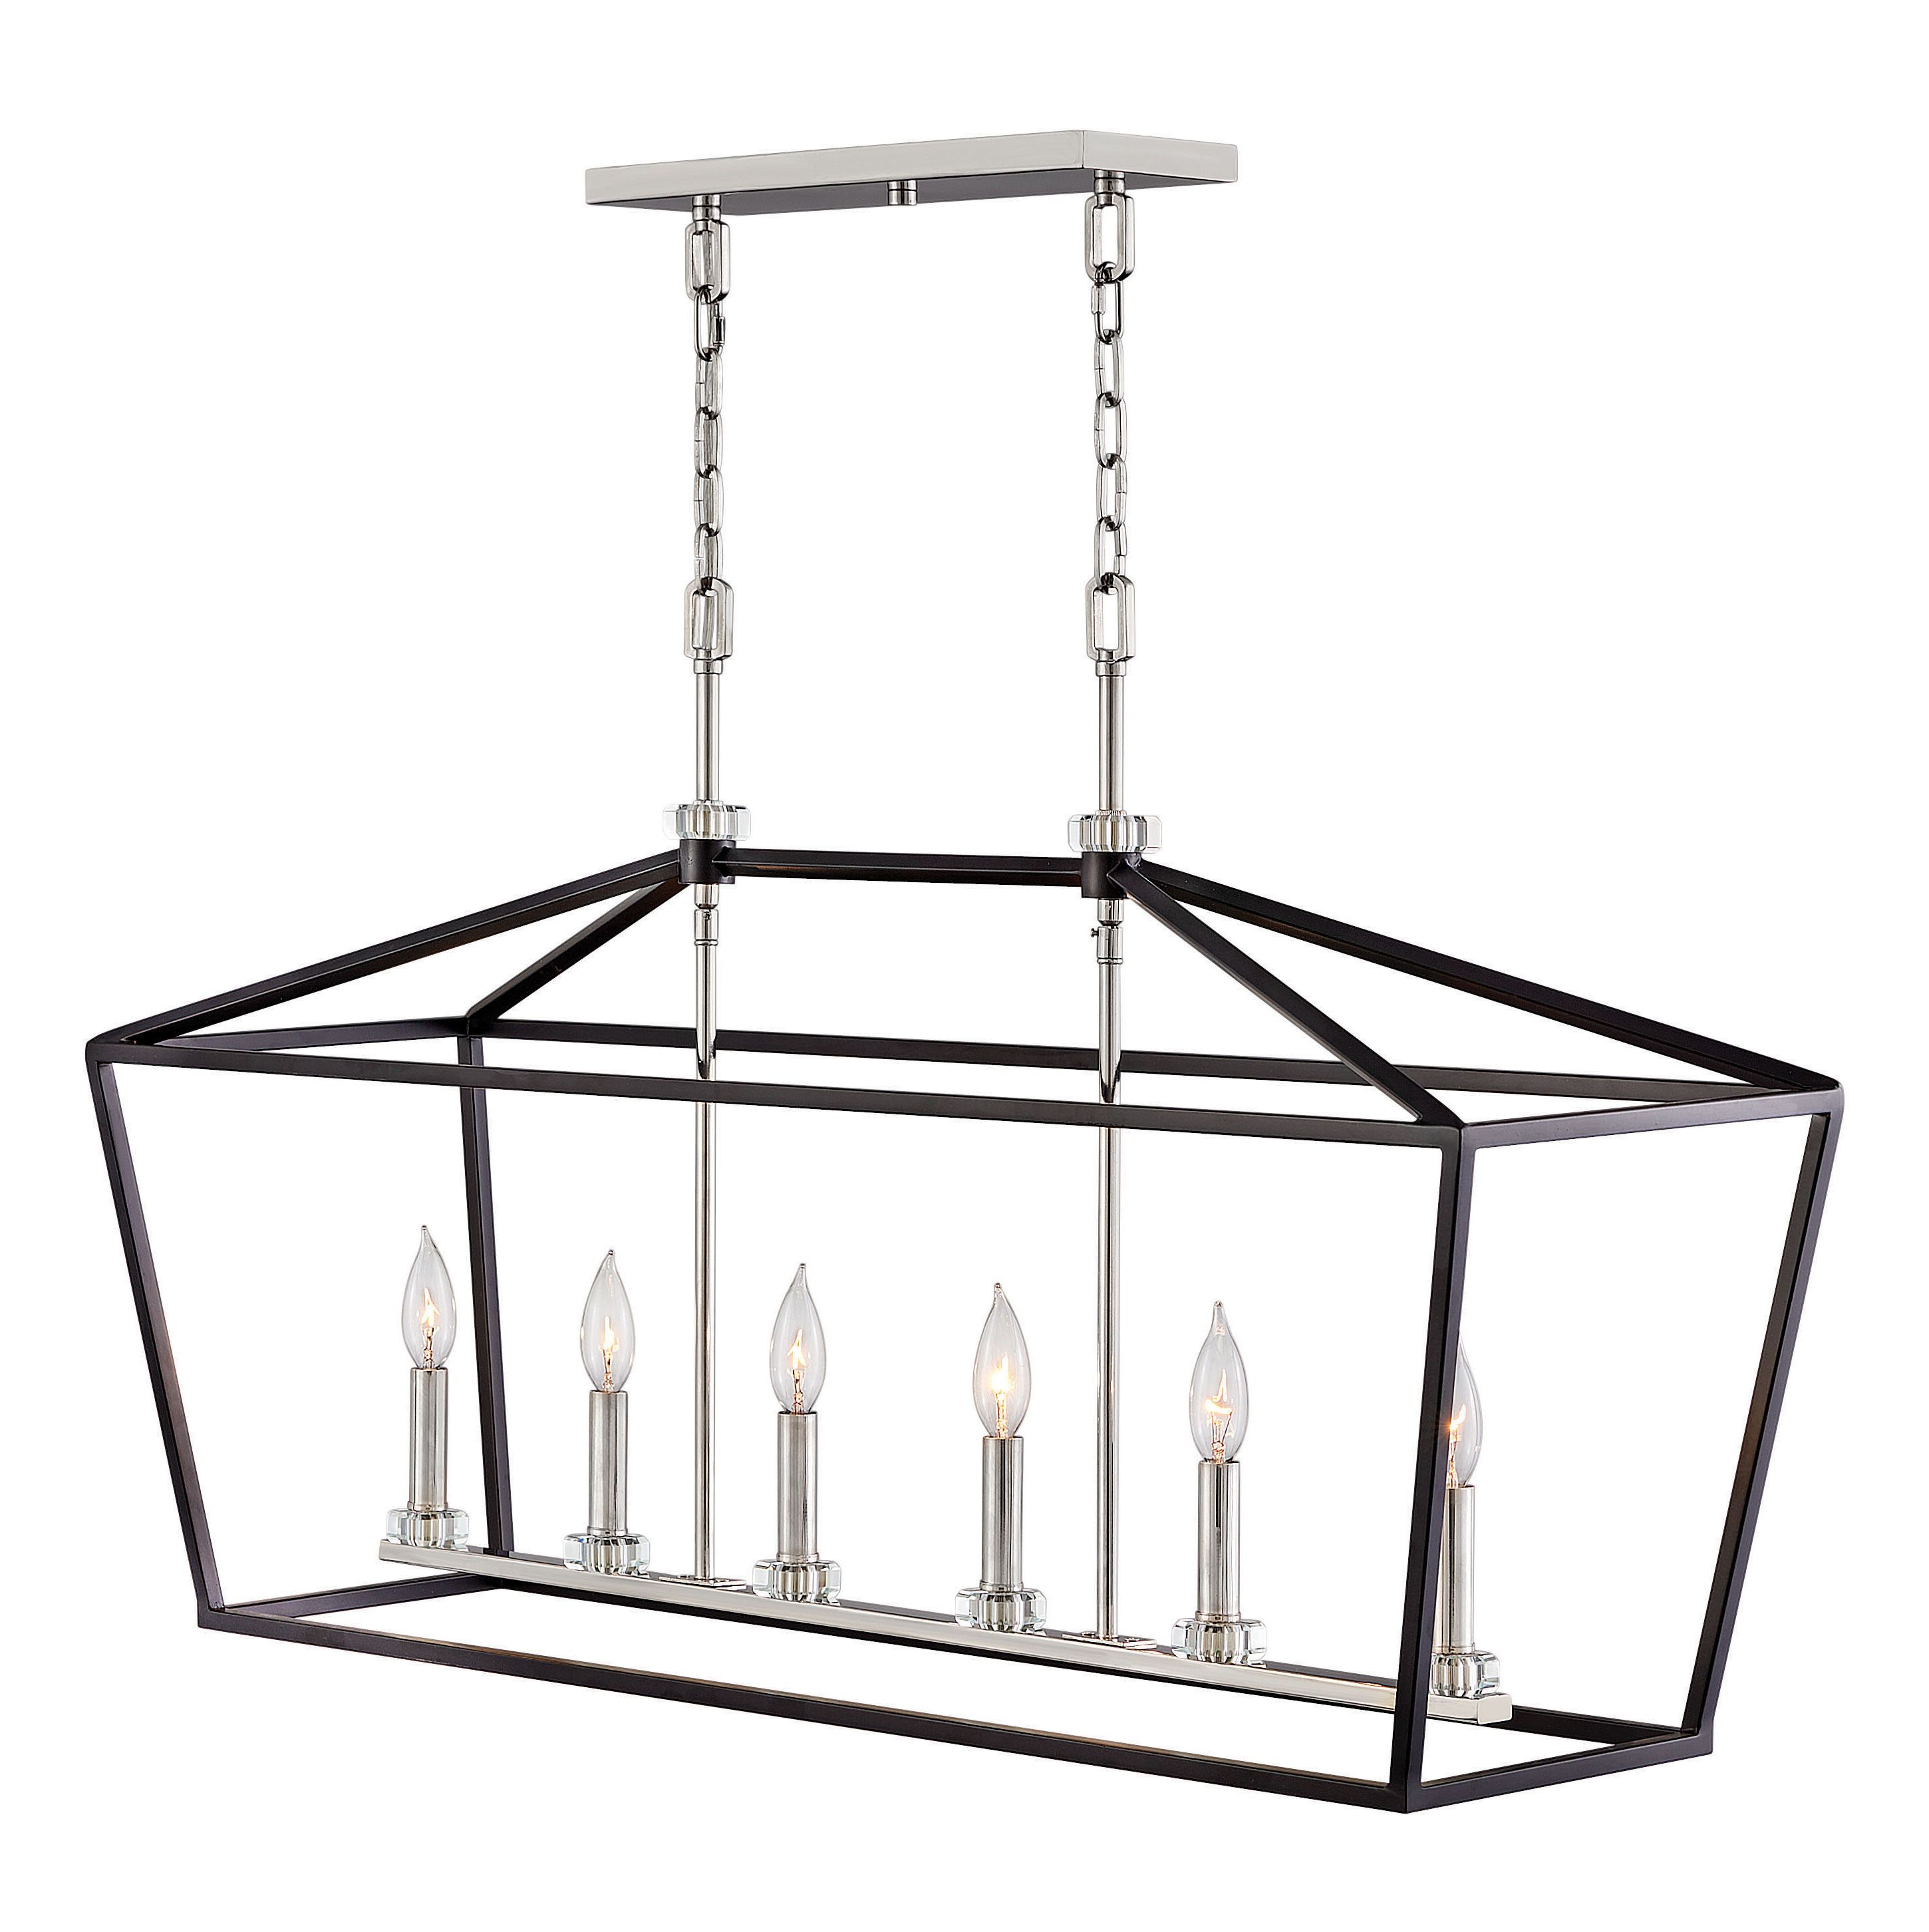 Stinson 6 Light Kitchen Island Linear Pendant Regarding Widely Used Freemont 5 Light Kitchen Island Linear Chandeliers (View 19 of 20)